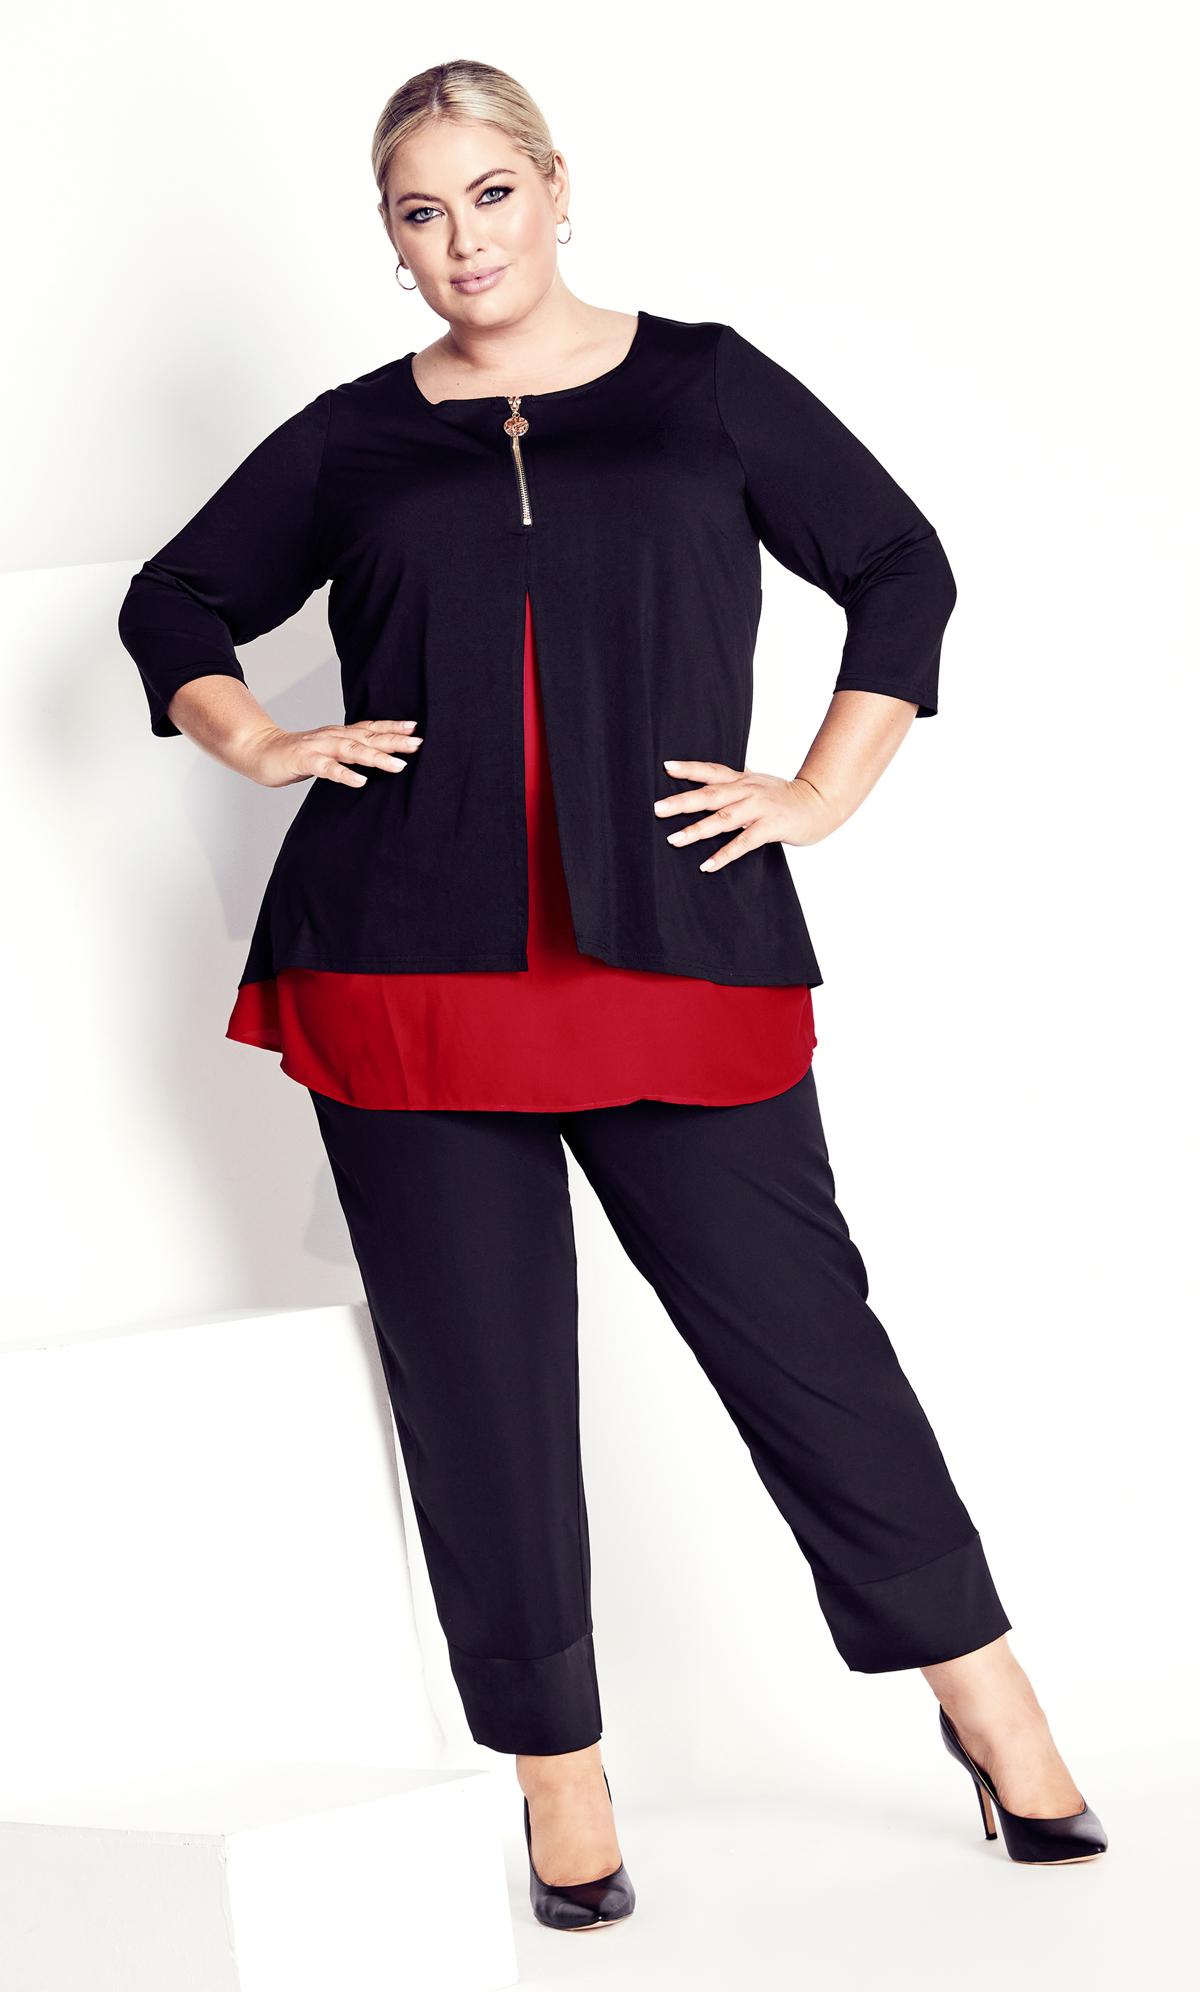 Evans Black & Red Double Layered Zip Front Tunic Top 2